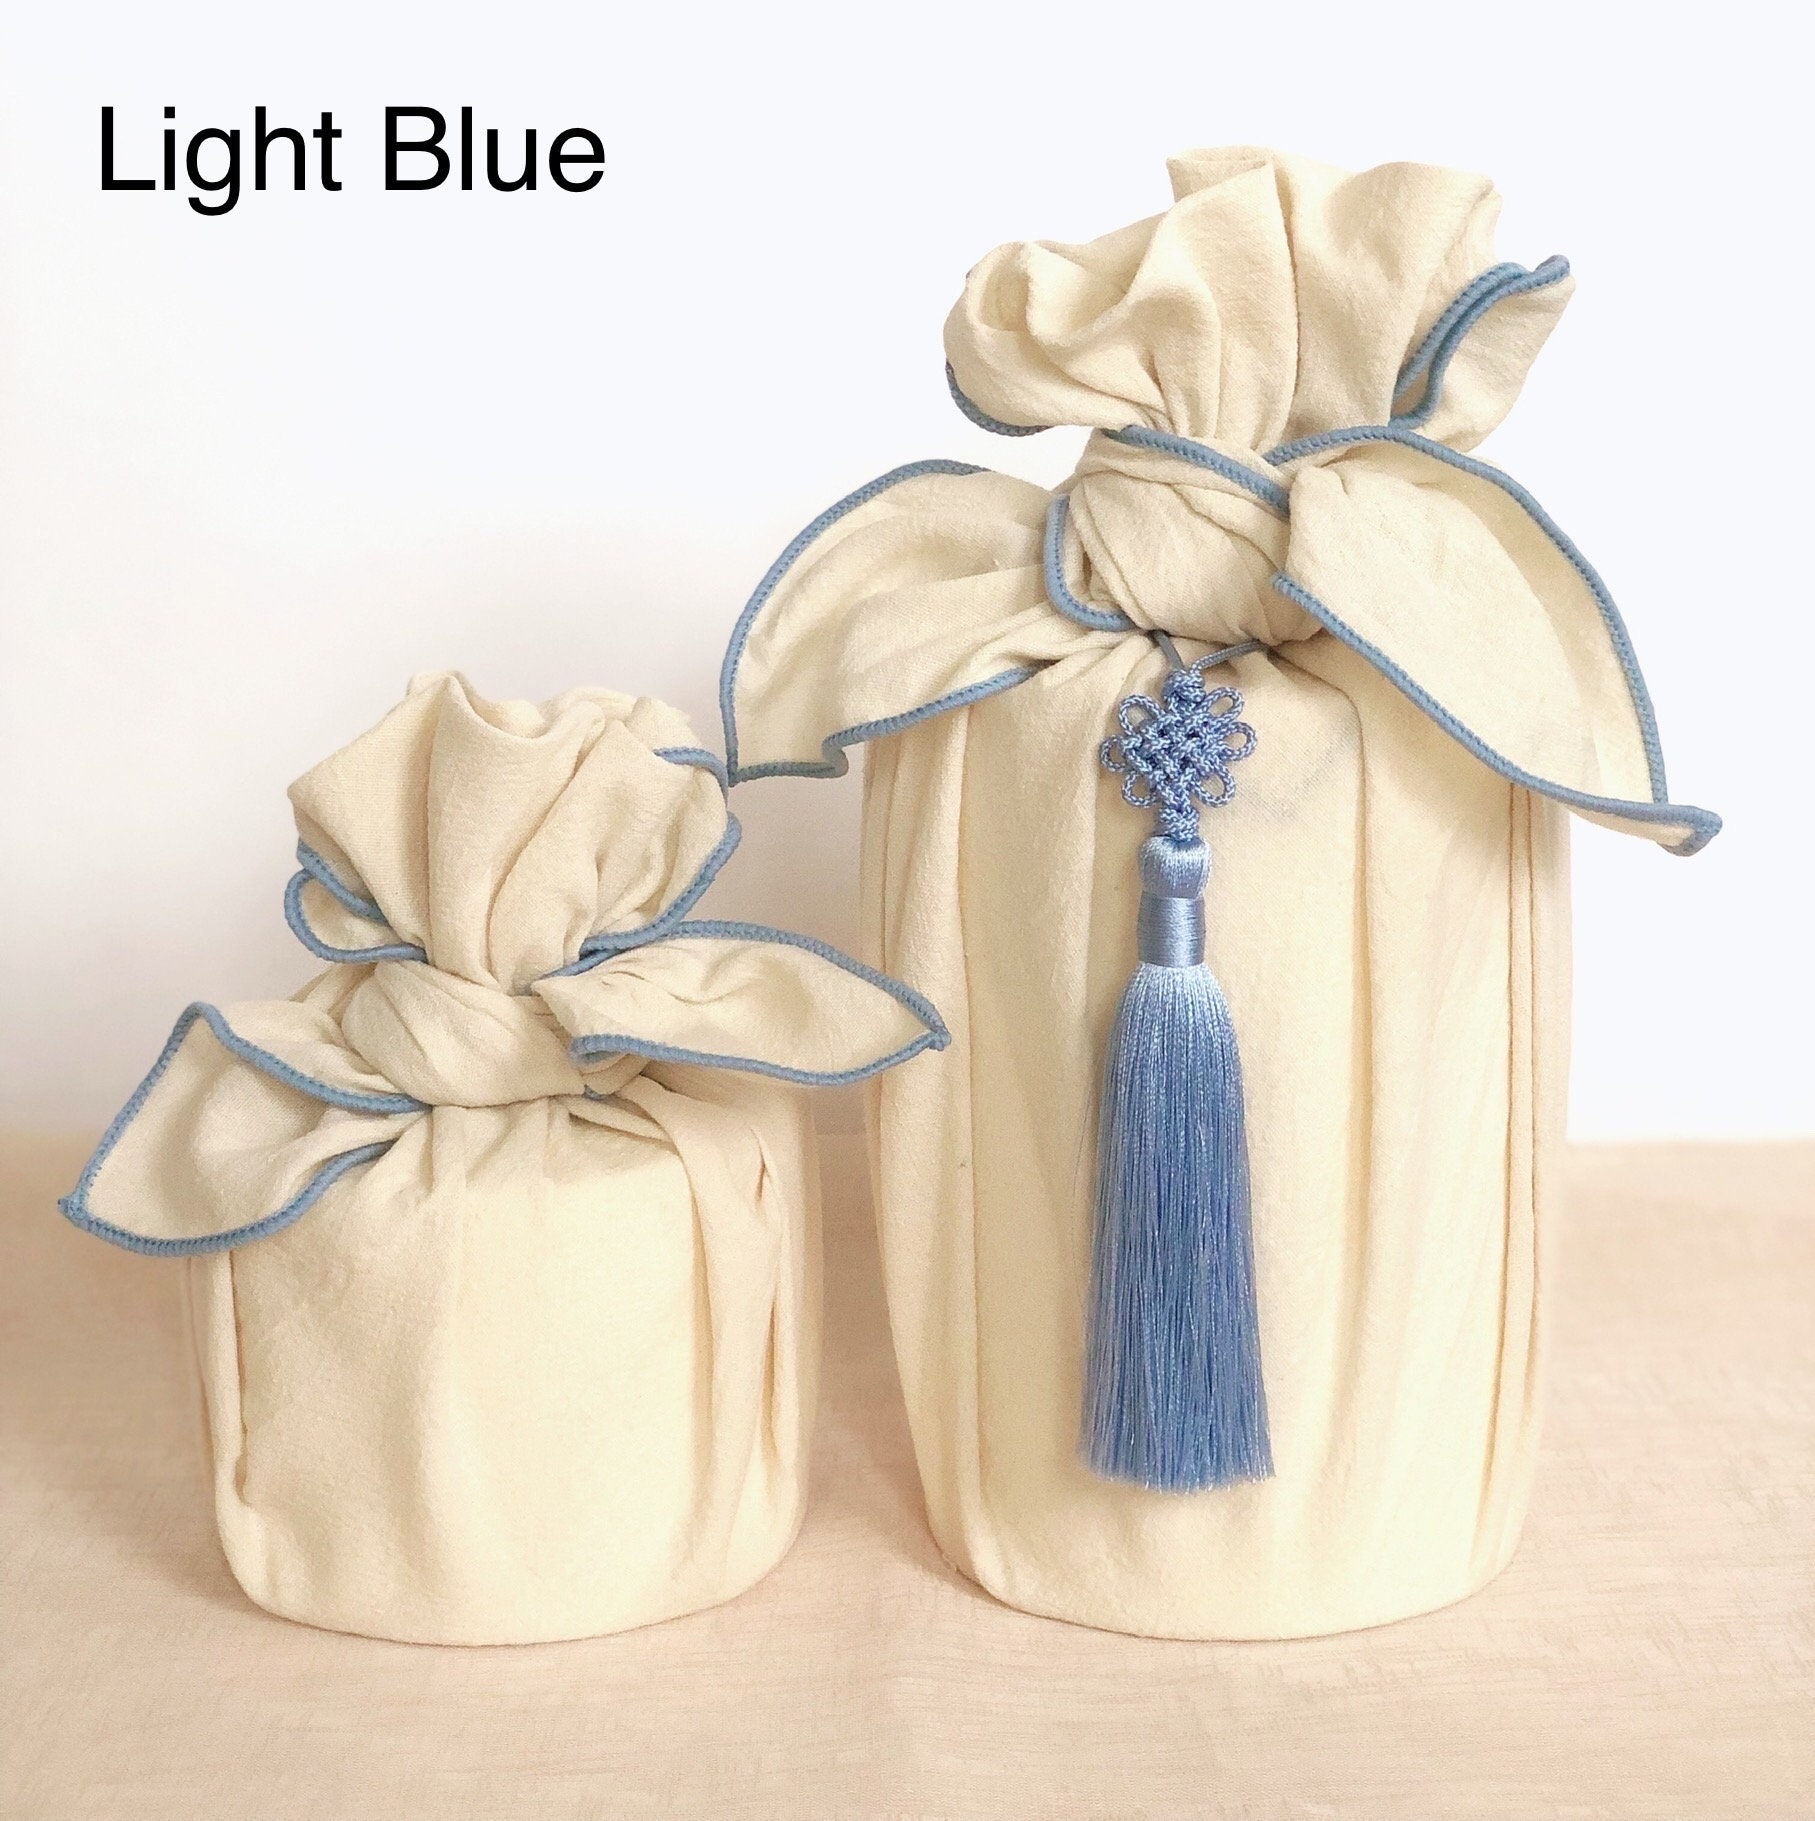 Wholesale Cheap Korean Gift Wrapping - Buy in Bulk on